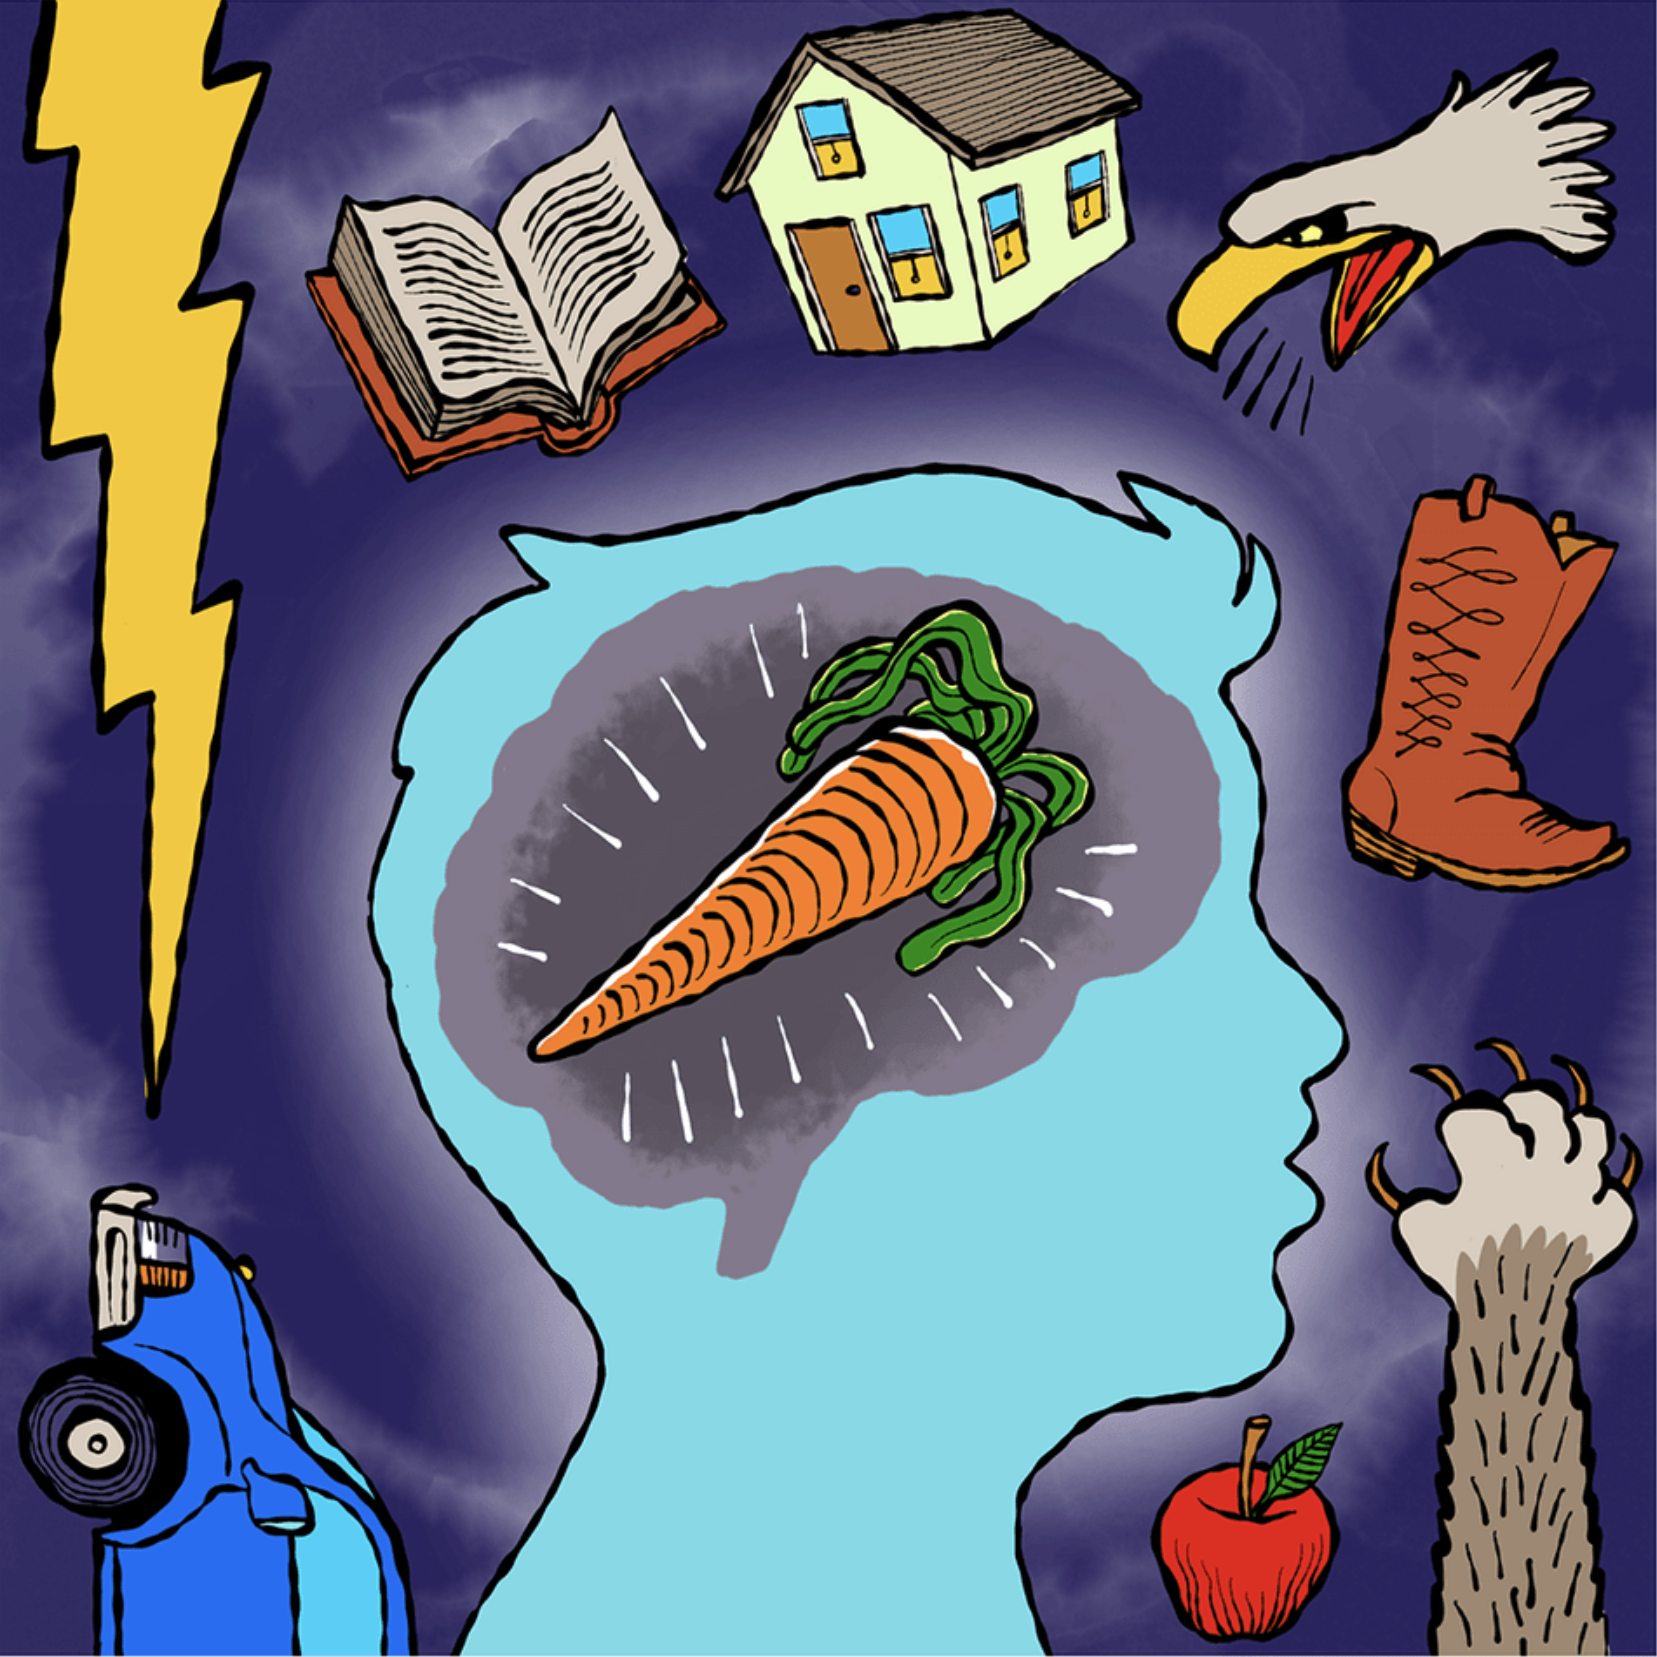 5% of incoming information hits conscious brain - image of brain with a carrot in it surrounded by lots of other items not inside brain